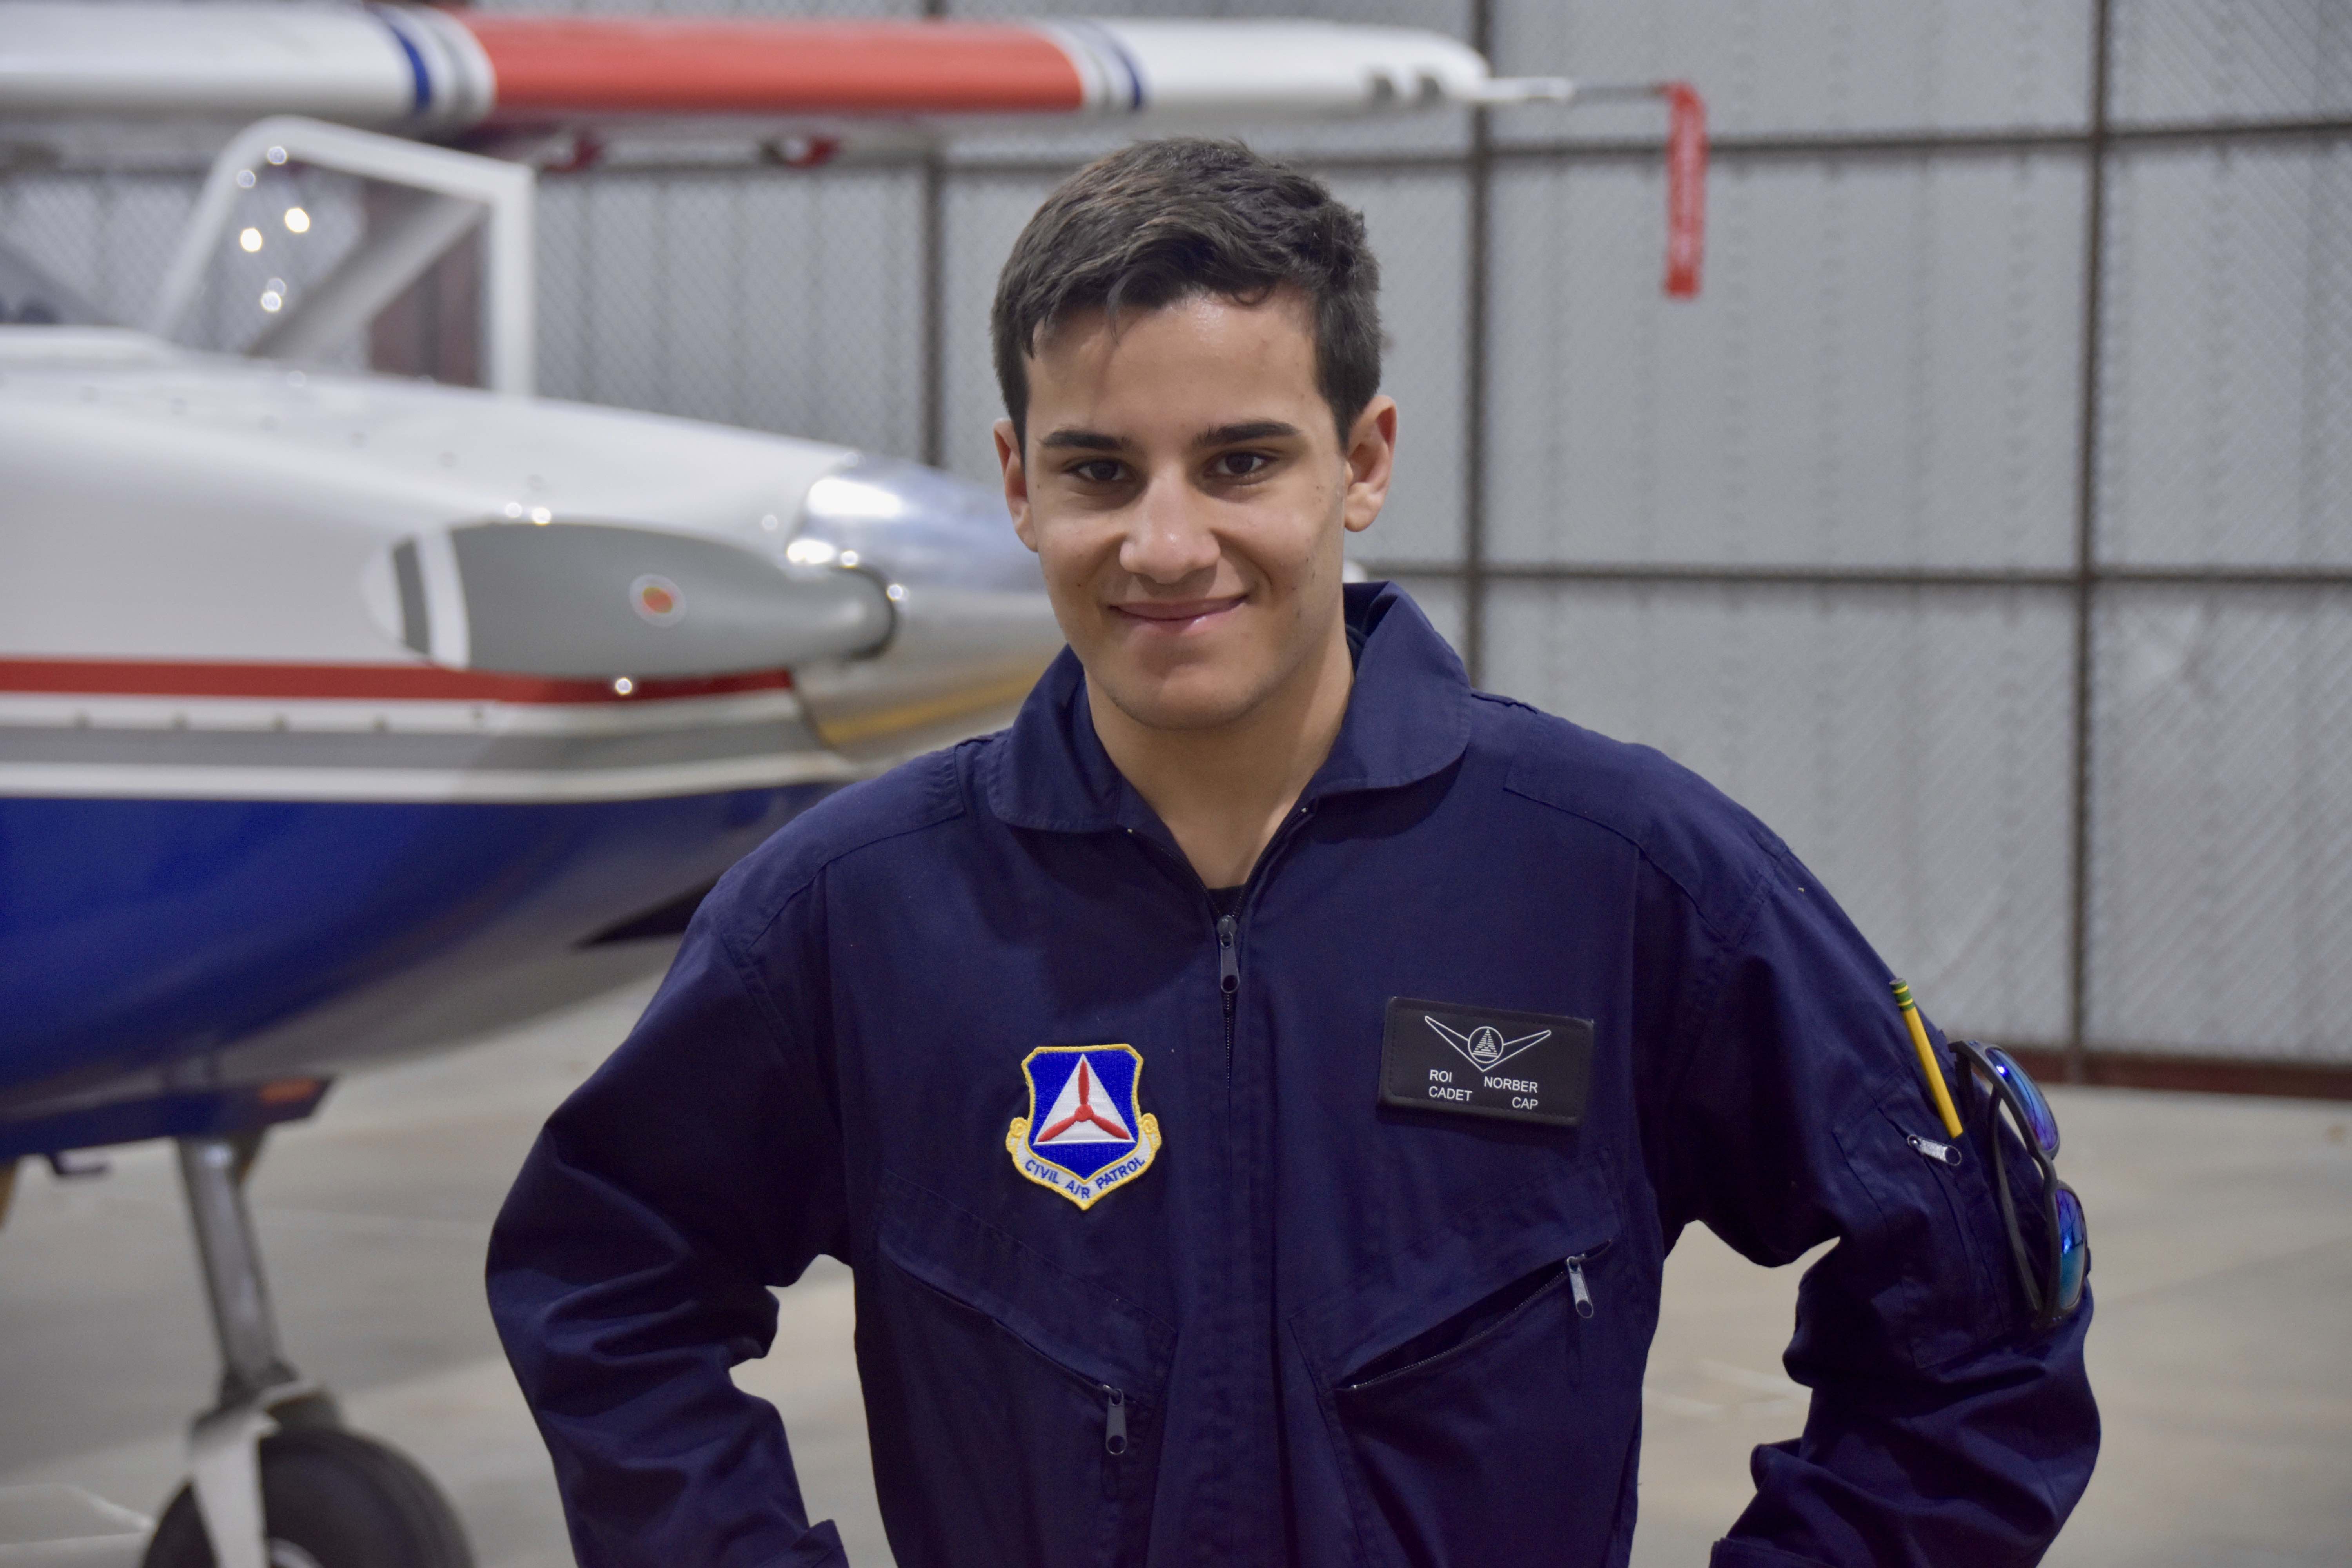 Cadet Norber in a hangar with a CAP plane